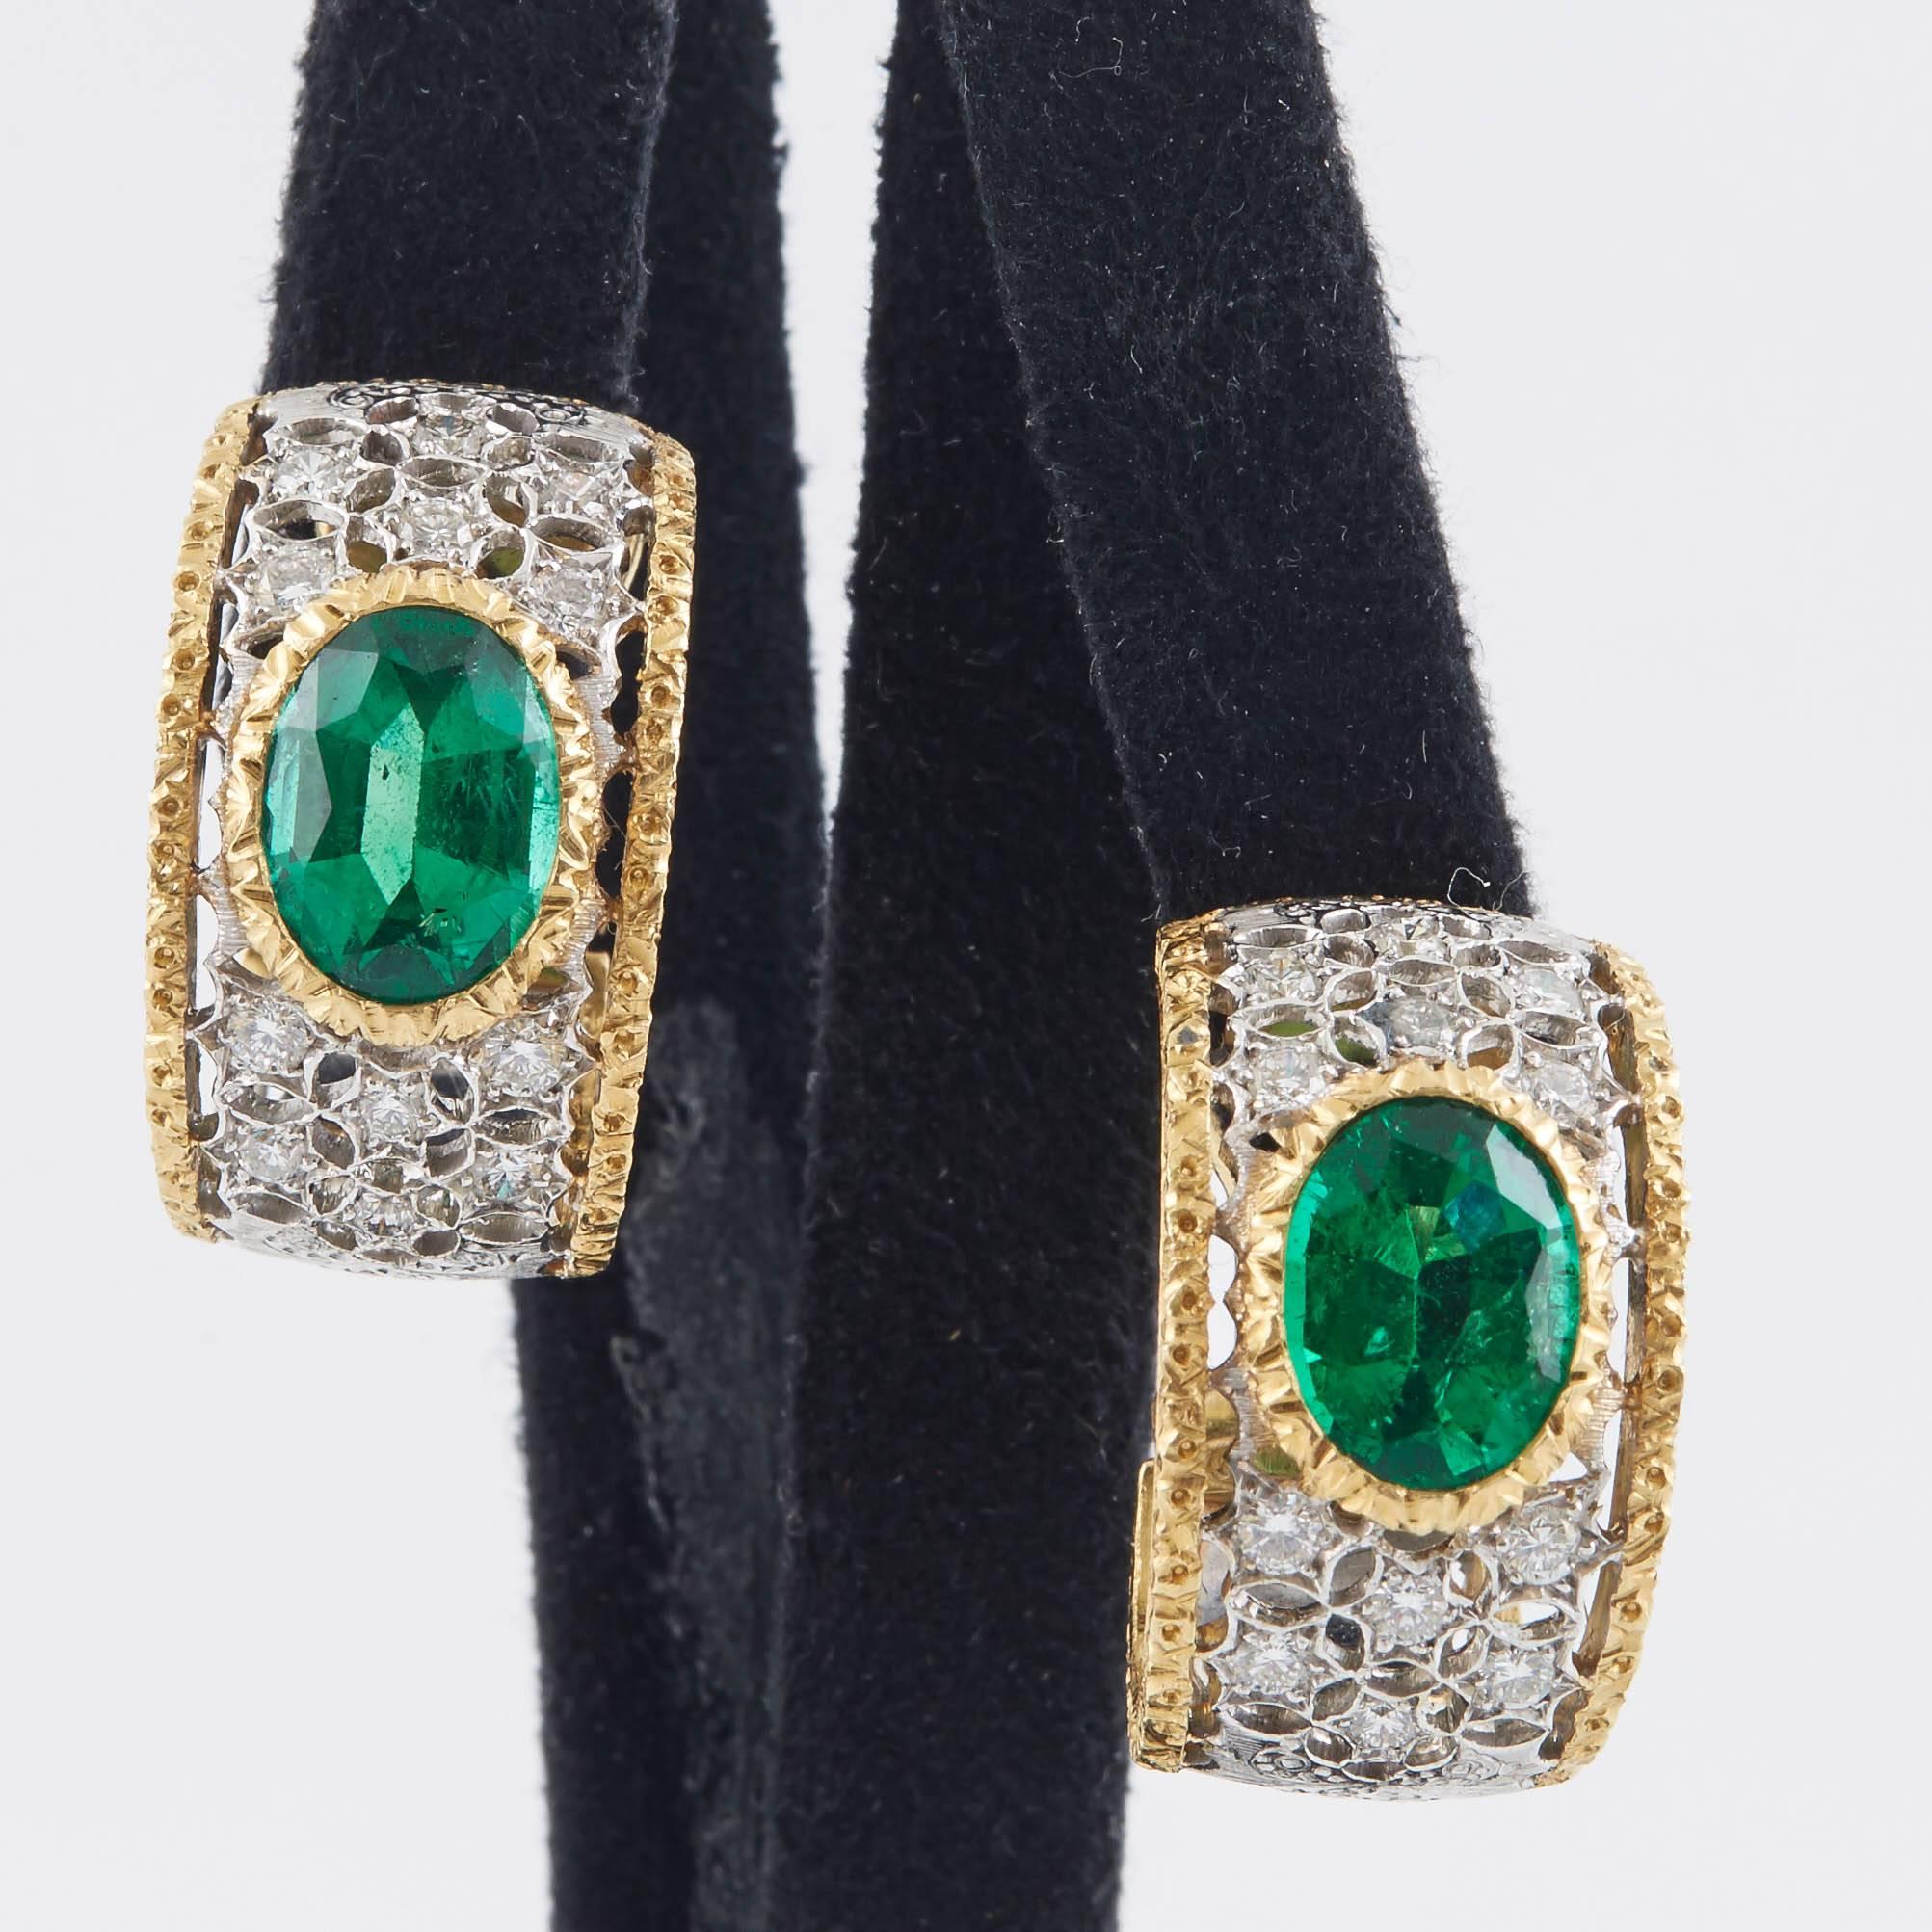 Large and gorgeous Mario Buccellati Diamond and Emerald ear clips. Each earring is centered with a large faceted emerald approx 2.50 carat. 